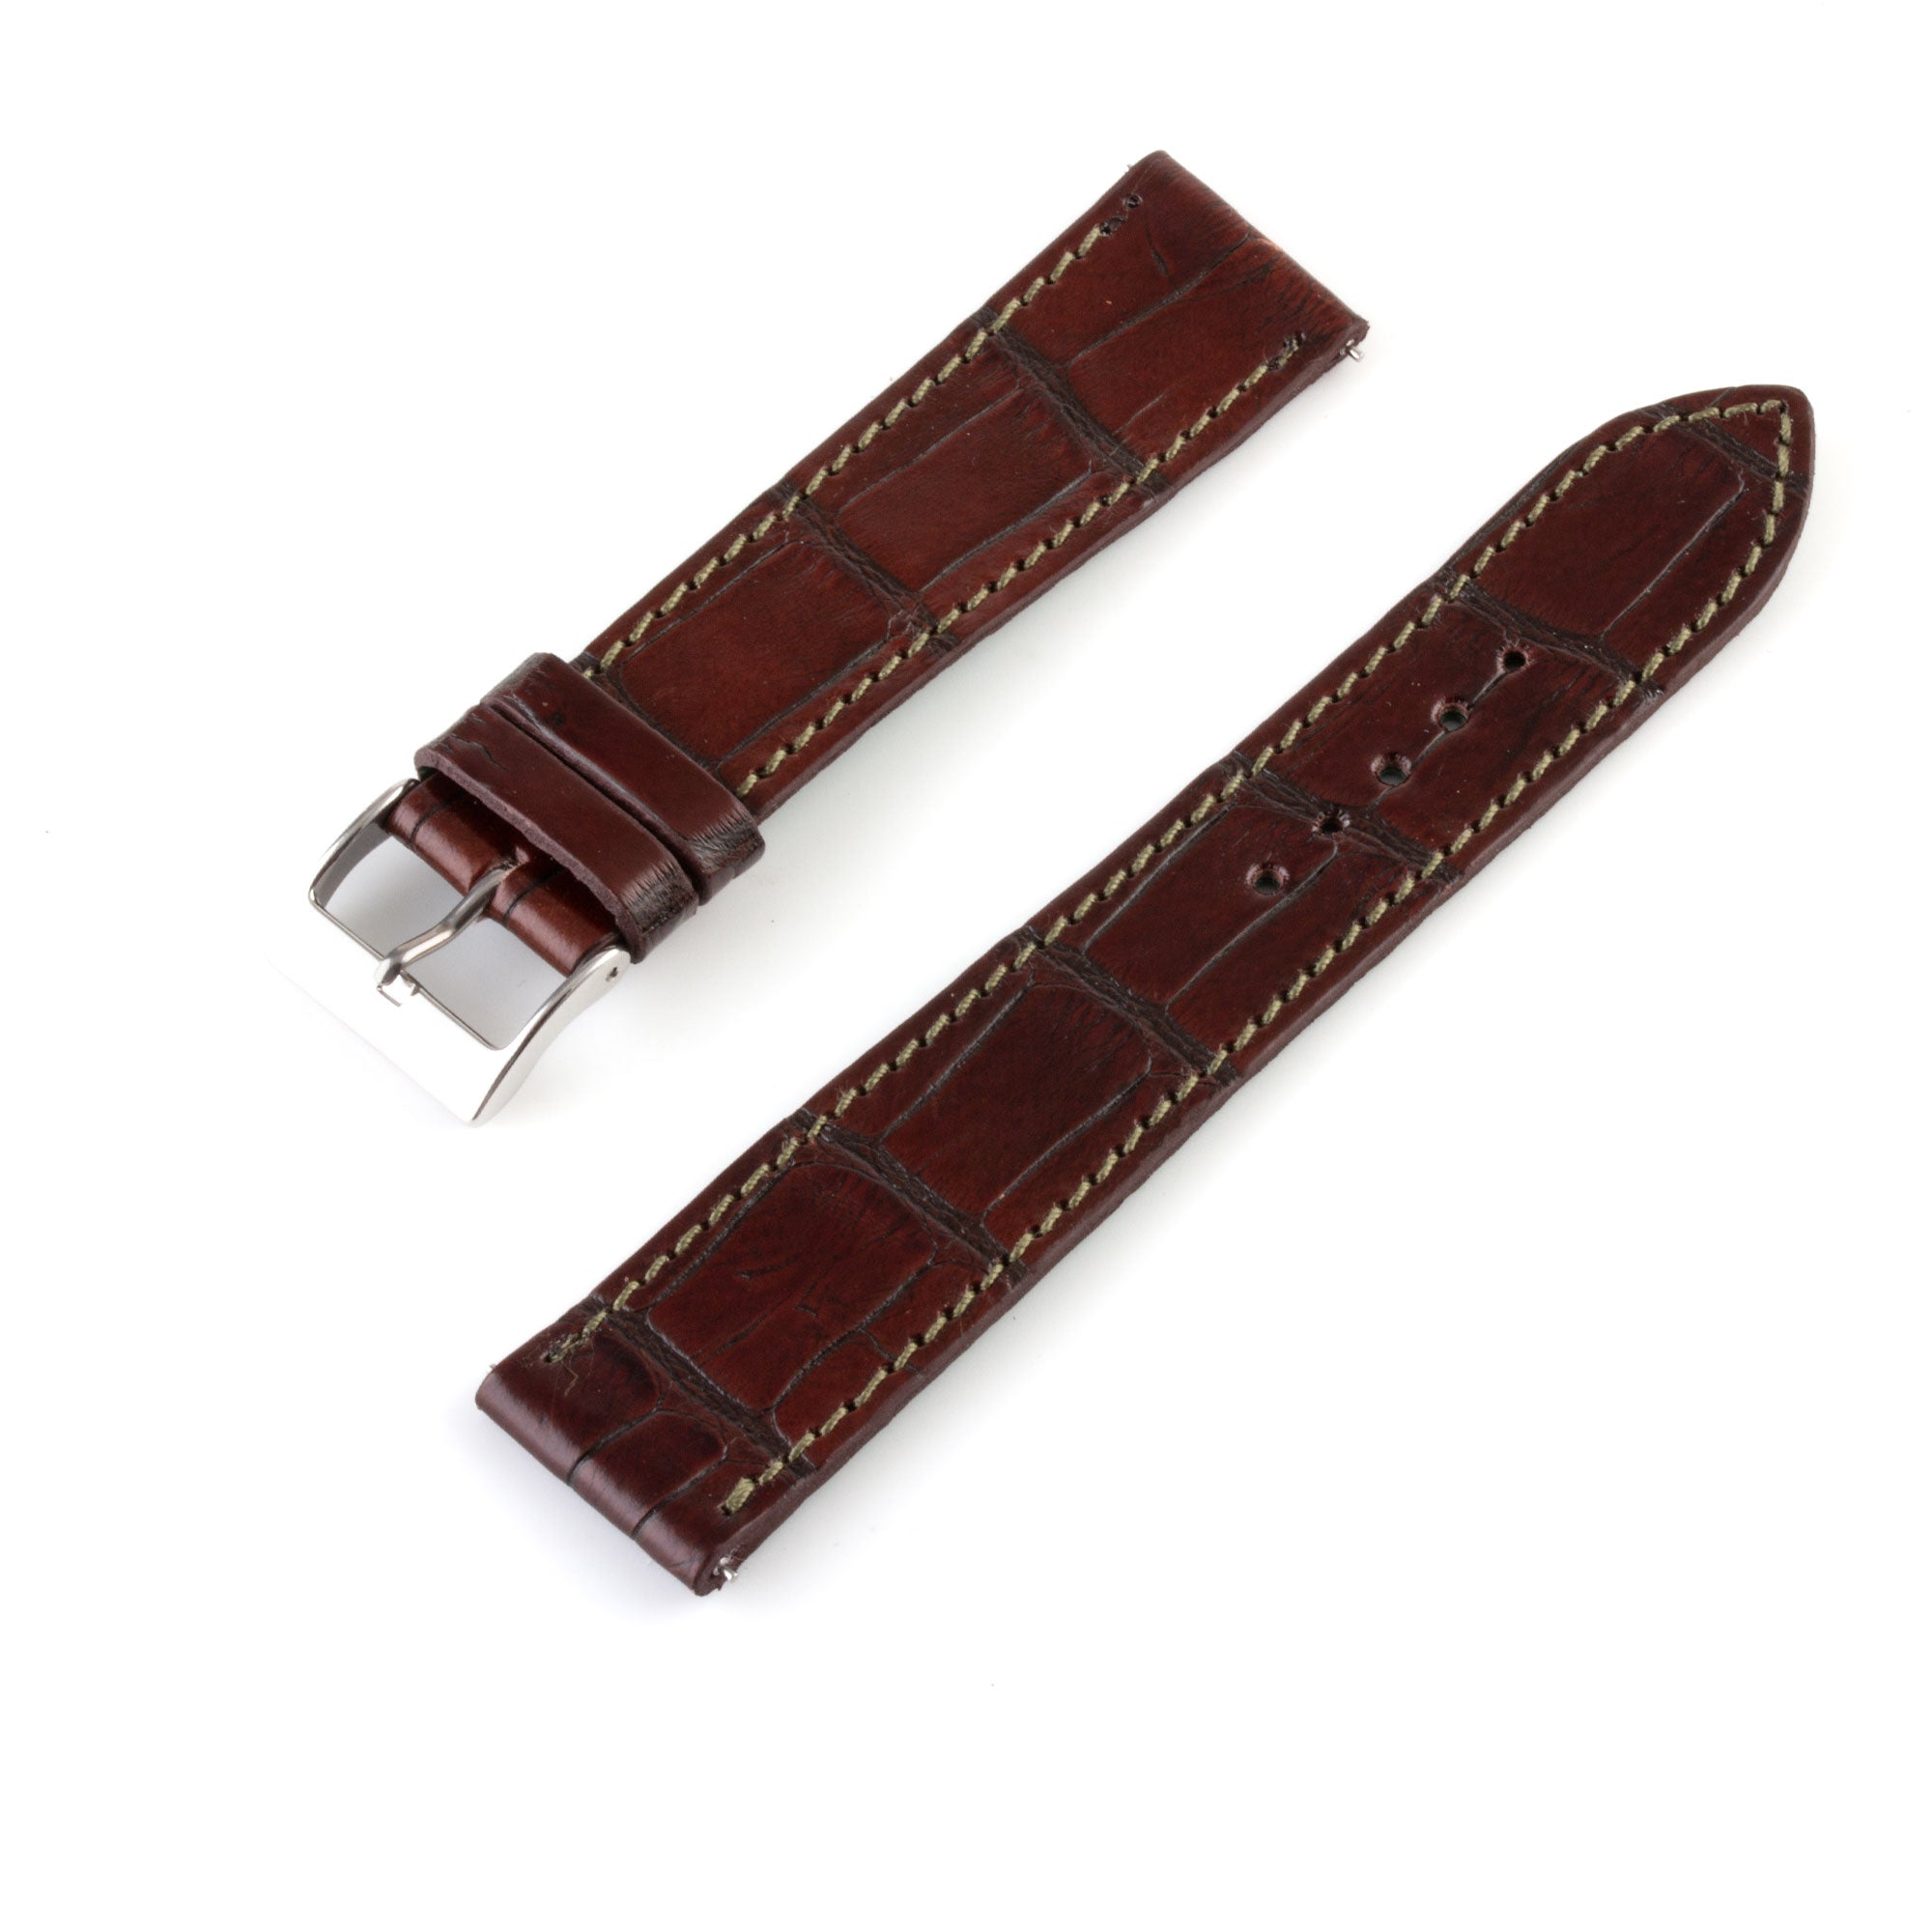 Alligator "Solo" leather watch band - 20mm width (0.79 inches) / Size M (n° 4)